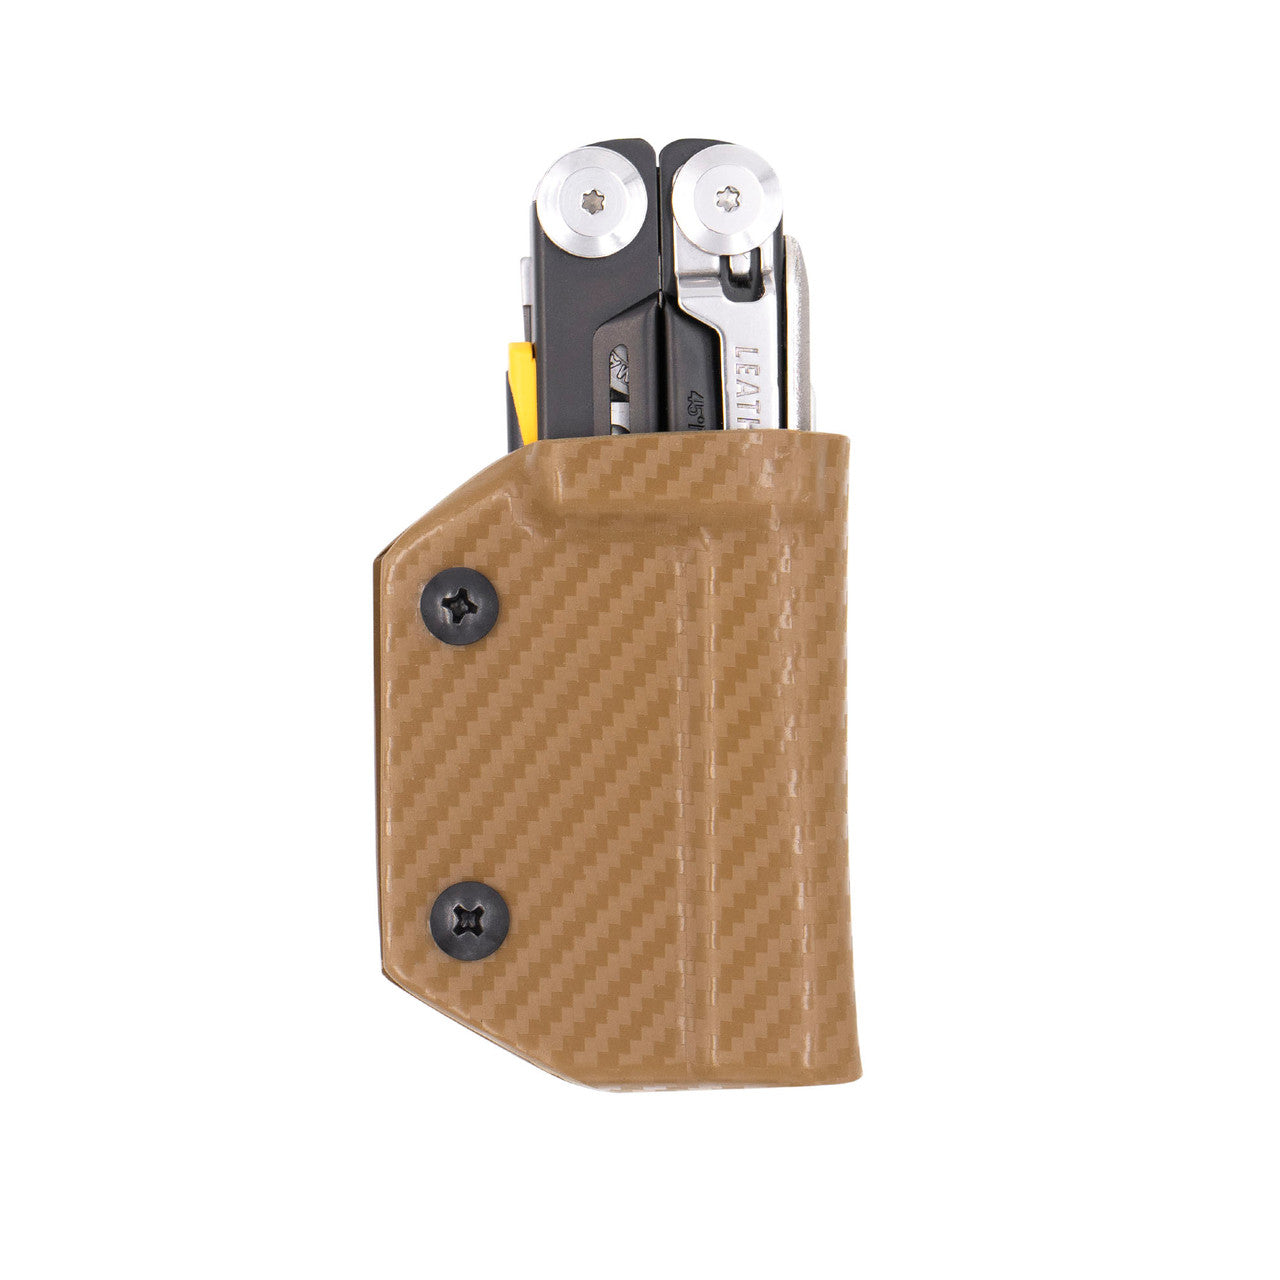 Kydex Sheath for the Leatherman Signal Clip & Carry